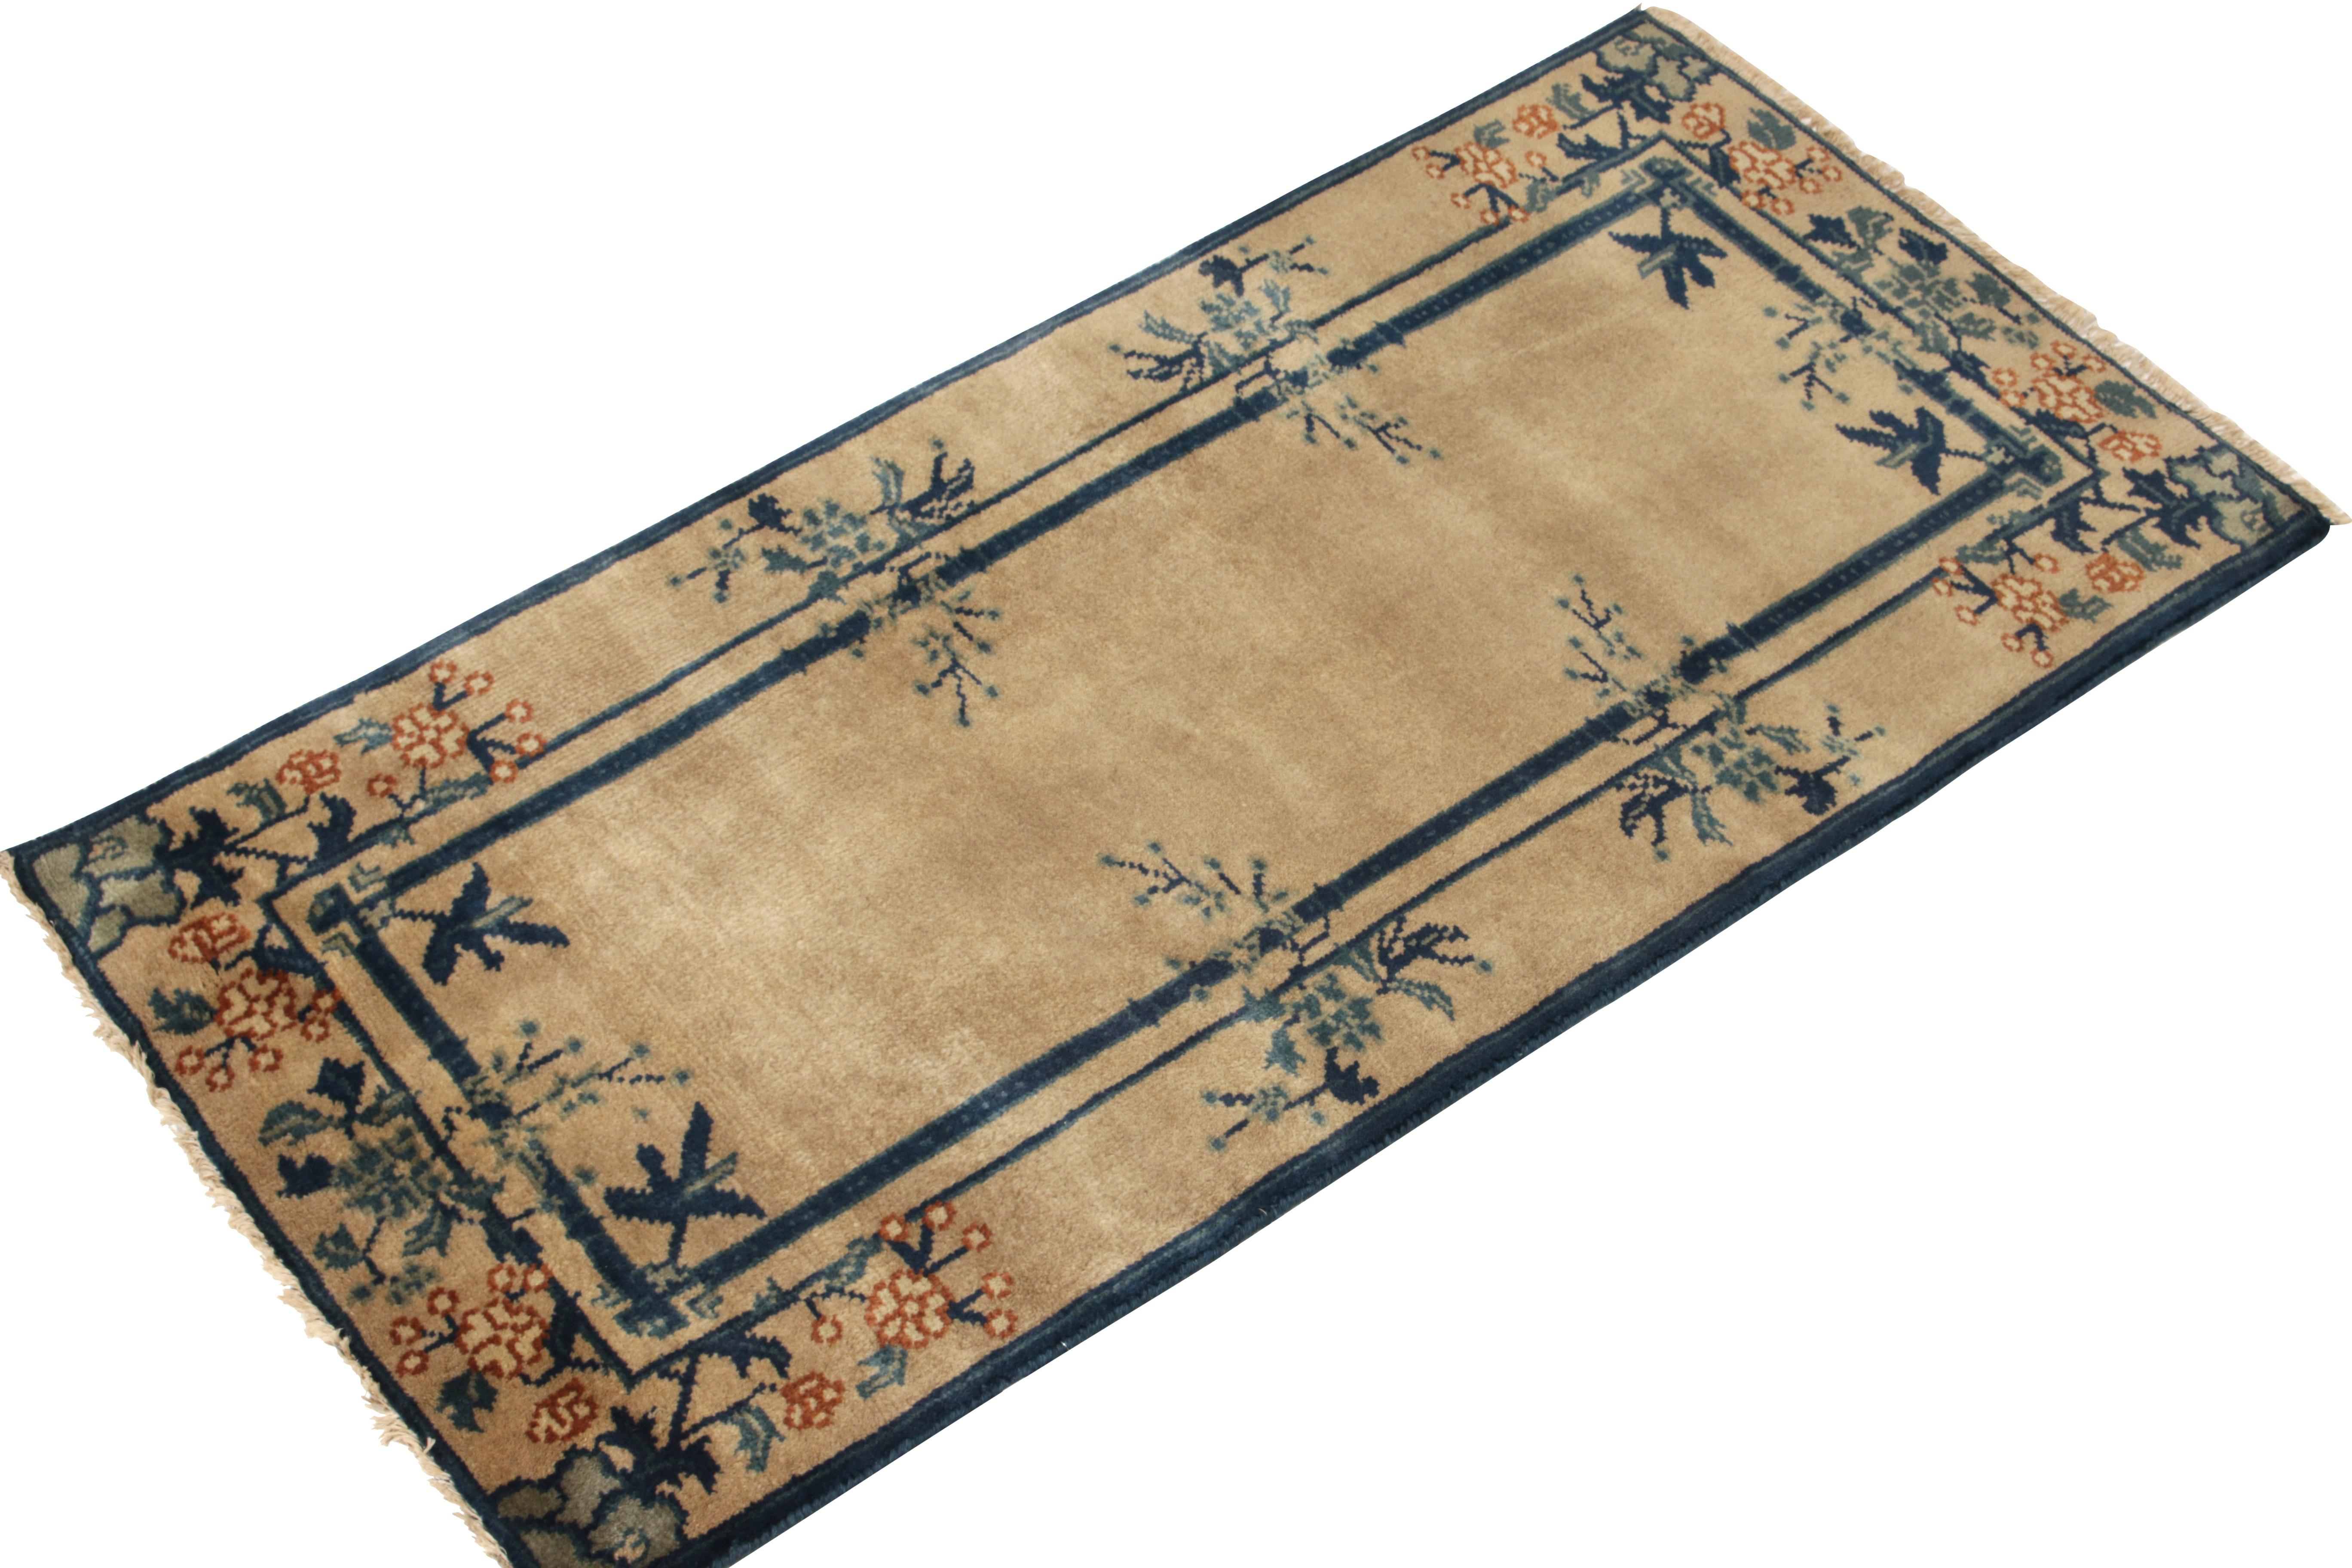 Art Deco Vintage Chinese Deco Style Rug in Beige Blue Green Floral Pattern by Rug & Kilim For Sale